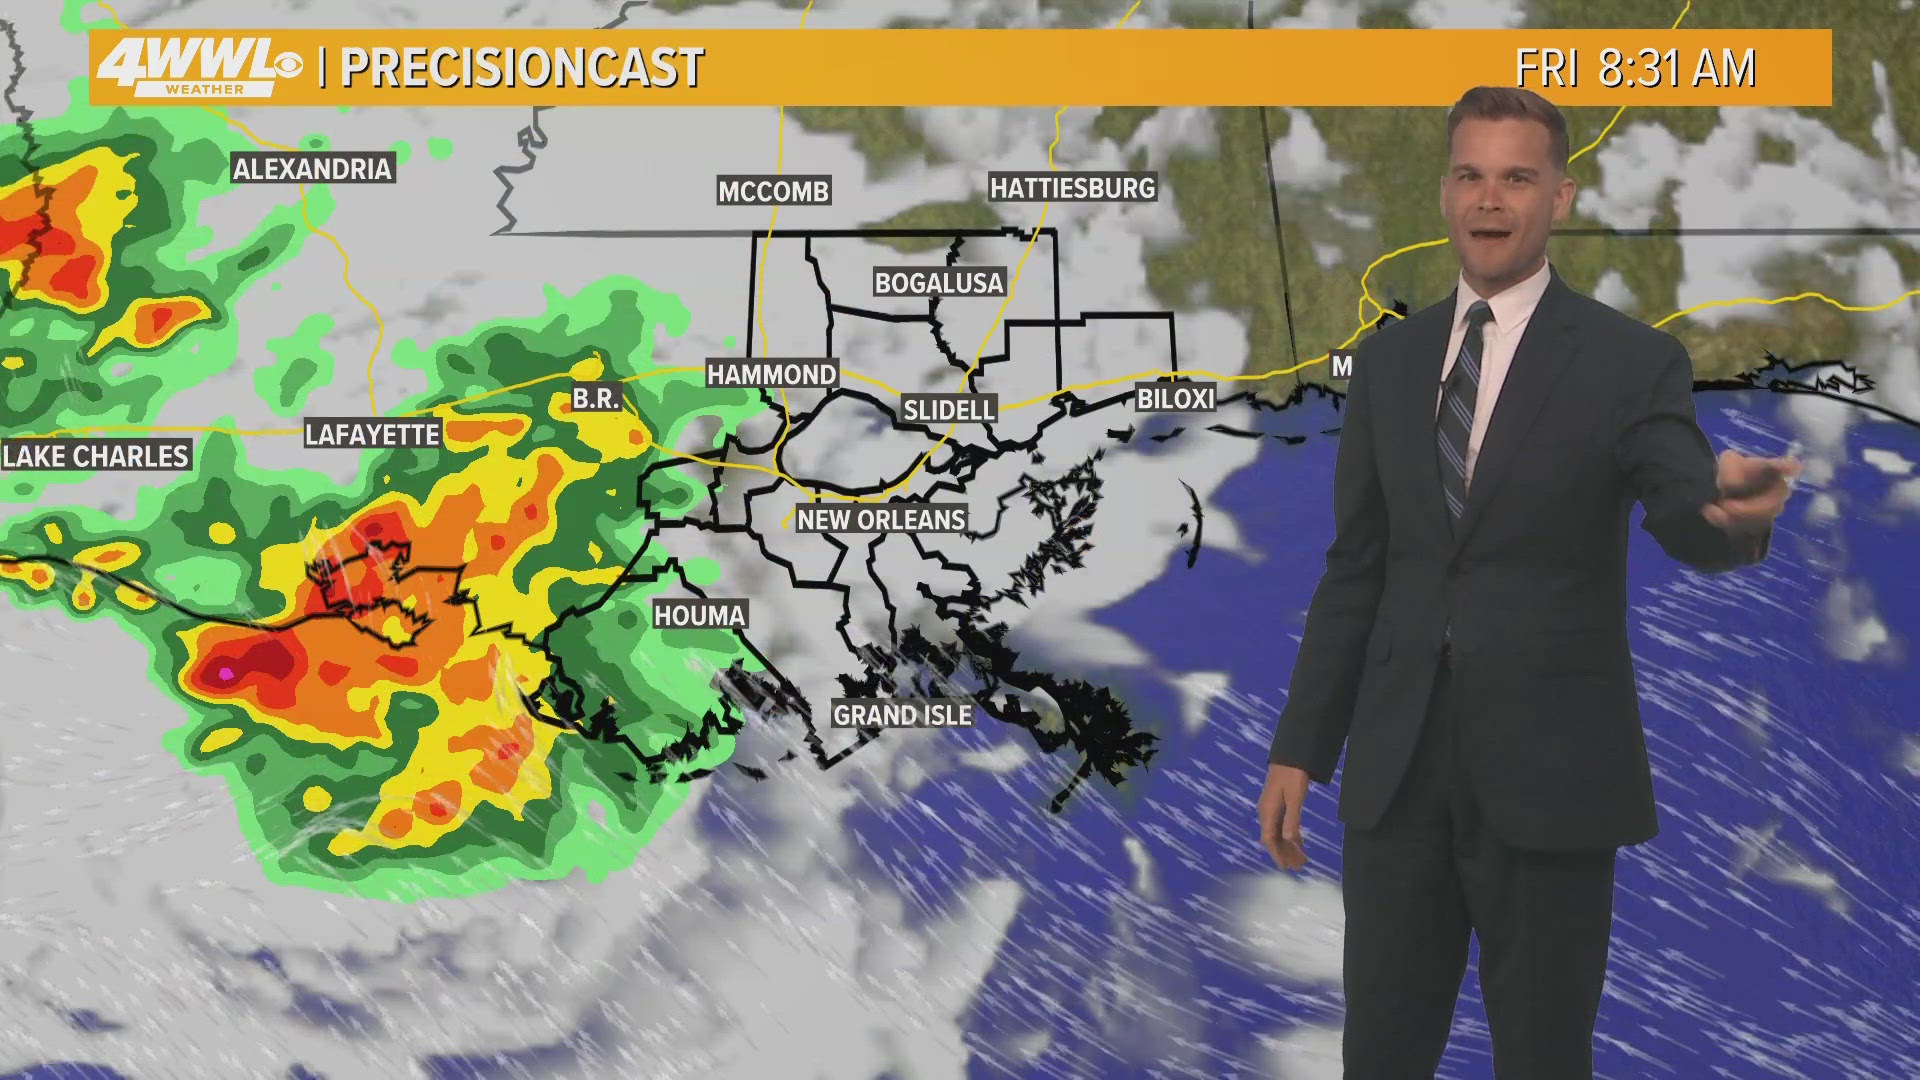 Friday morning weather update from WWL Meteorologist Payton Malone ahead of showers.